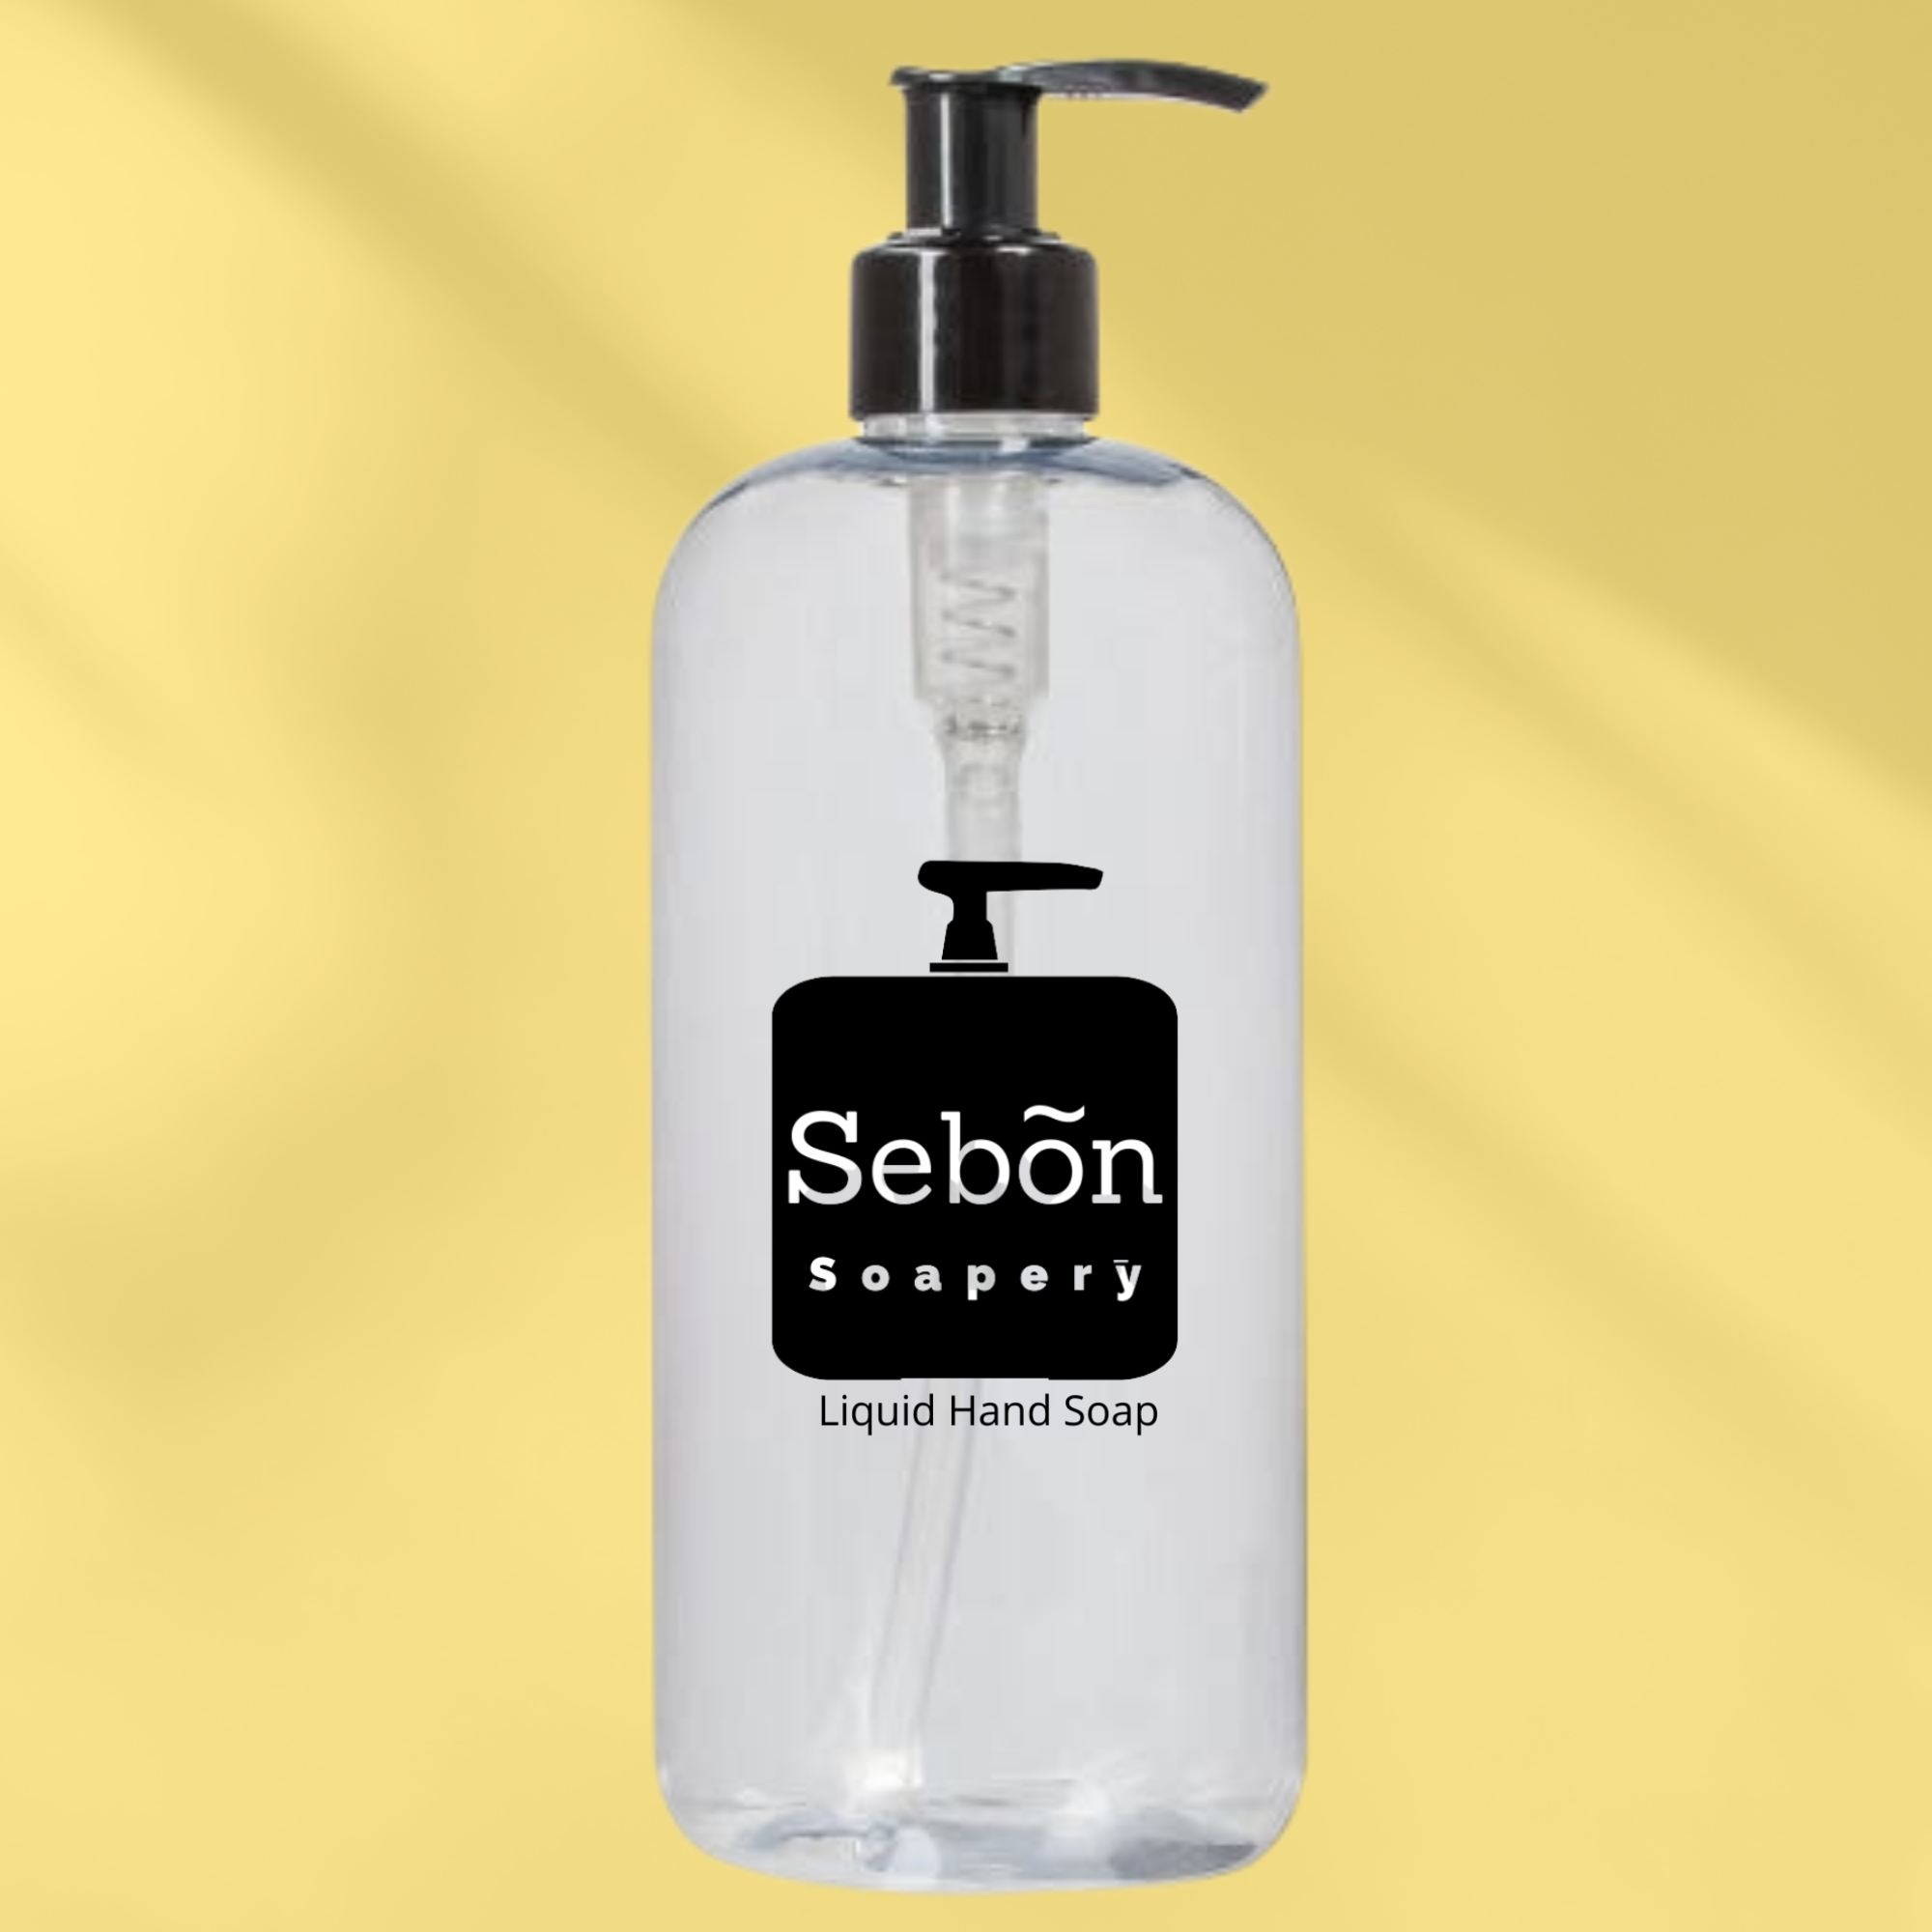 Sebon Chocolate Covered Cherries Scented Liquid Hand Soap with Olive Oil